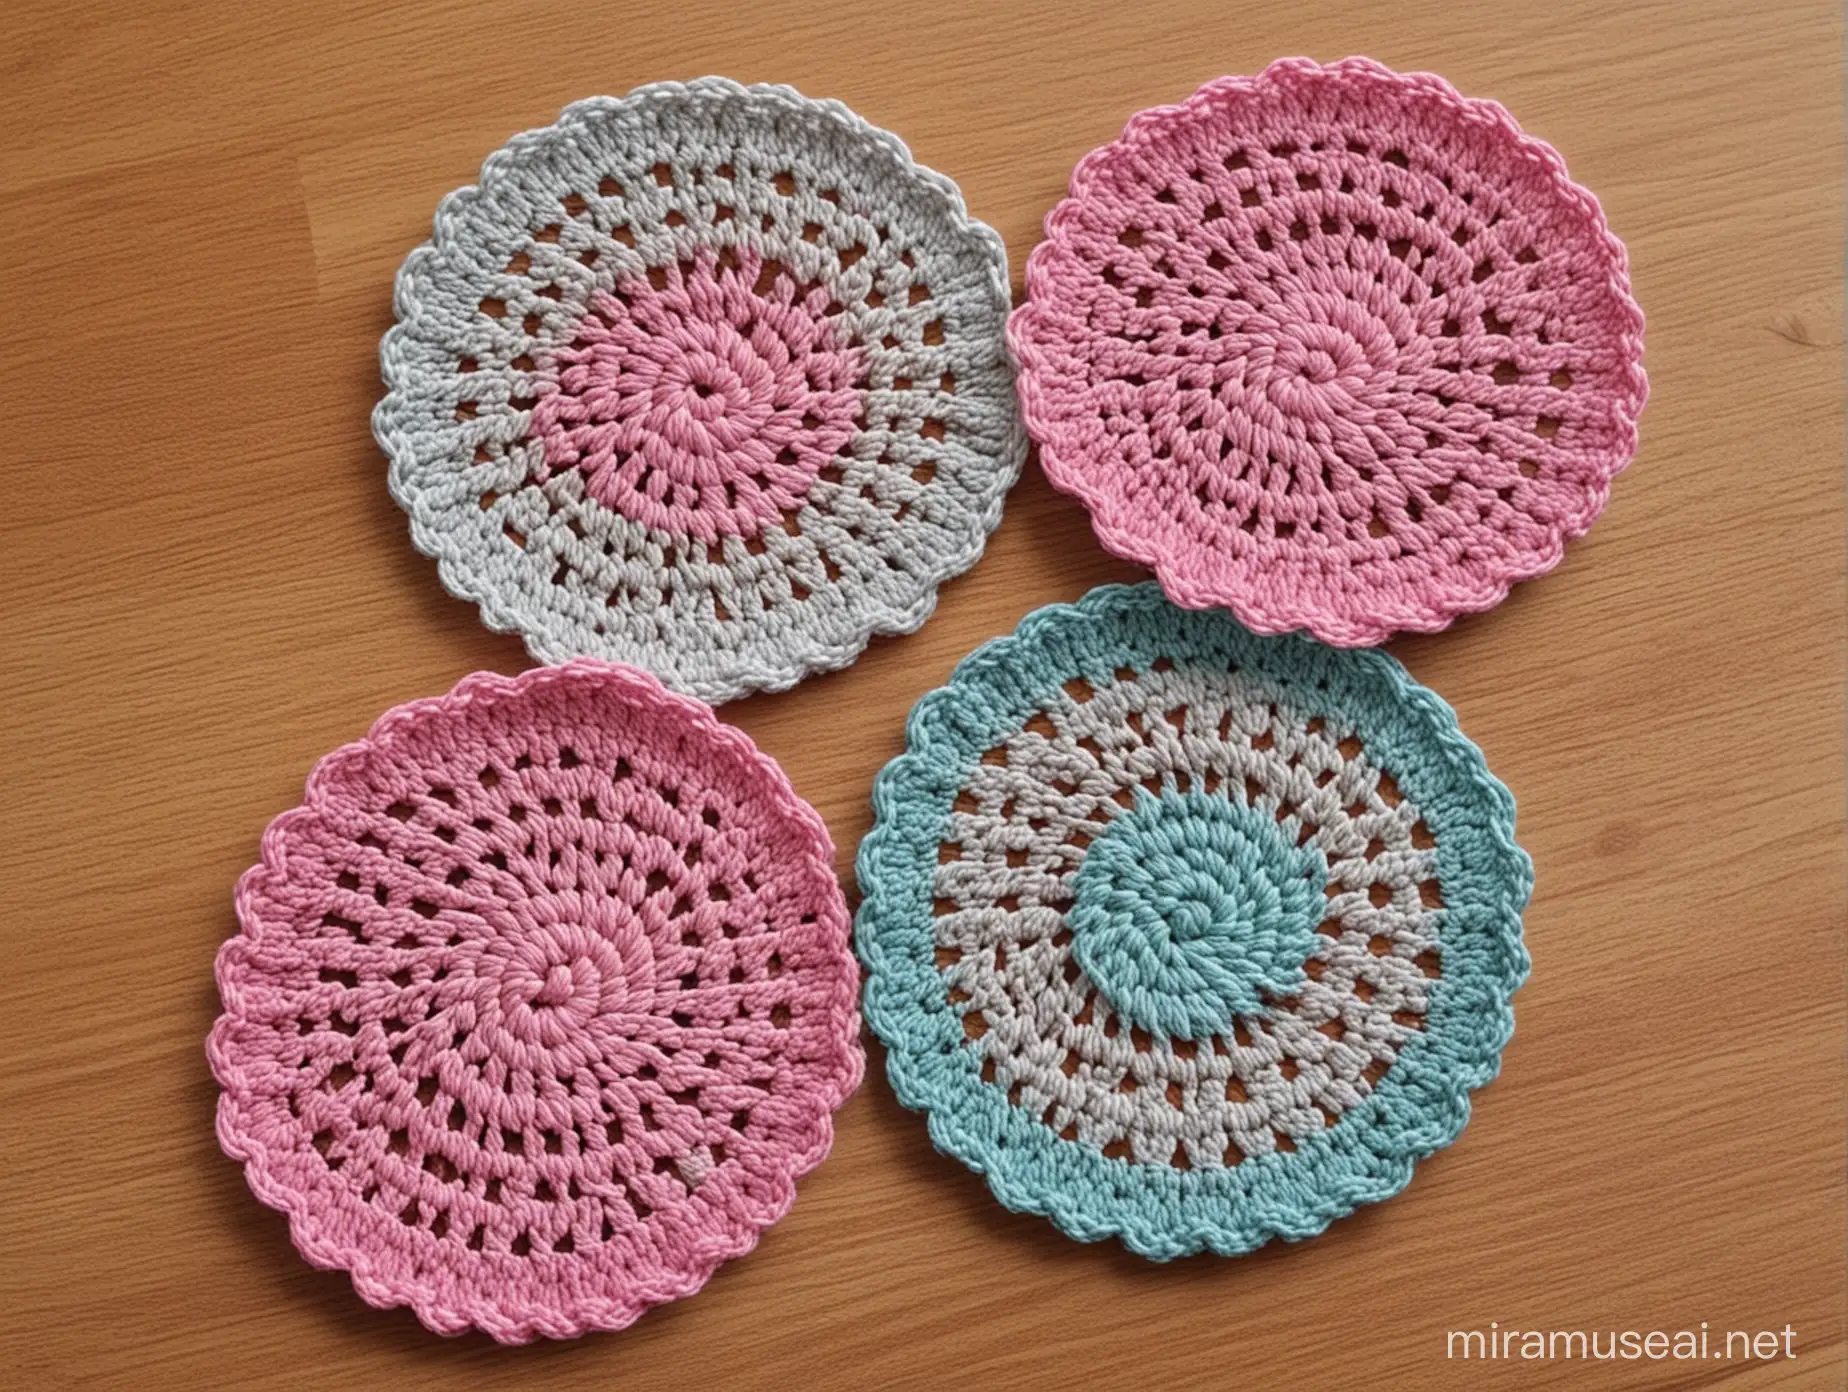 Handmade Crochet Coasters in Various Colors and Patterns